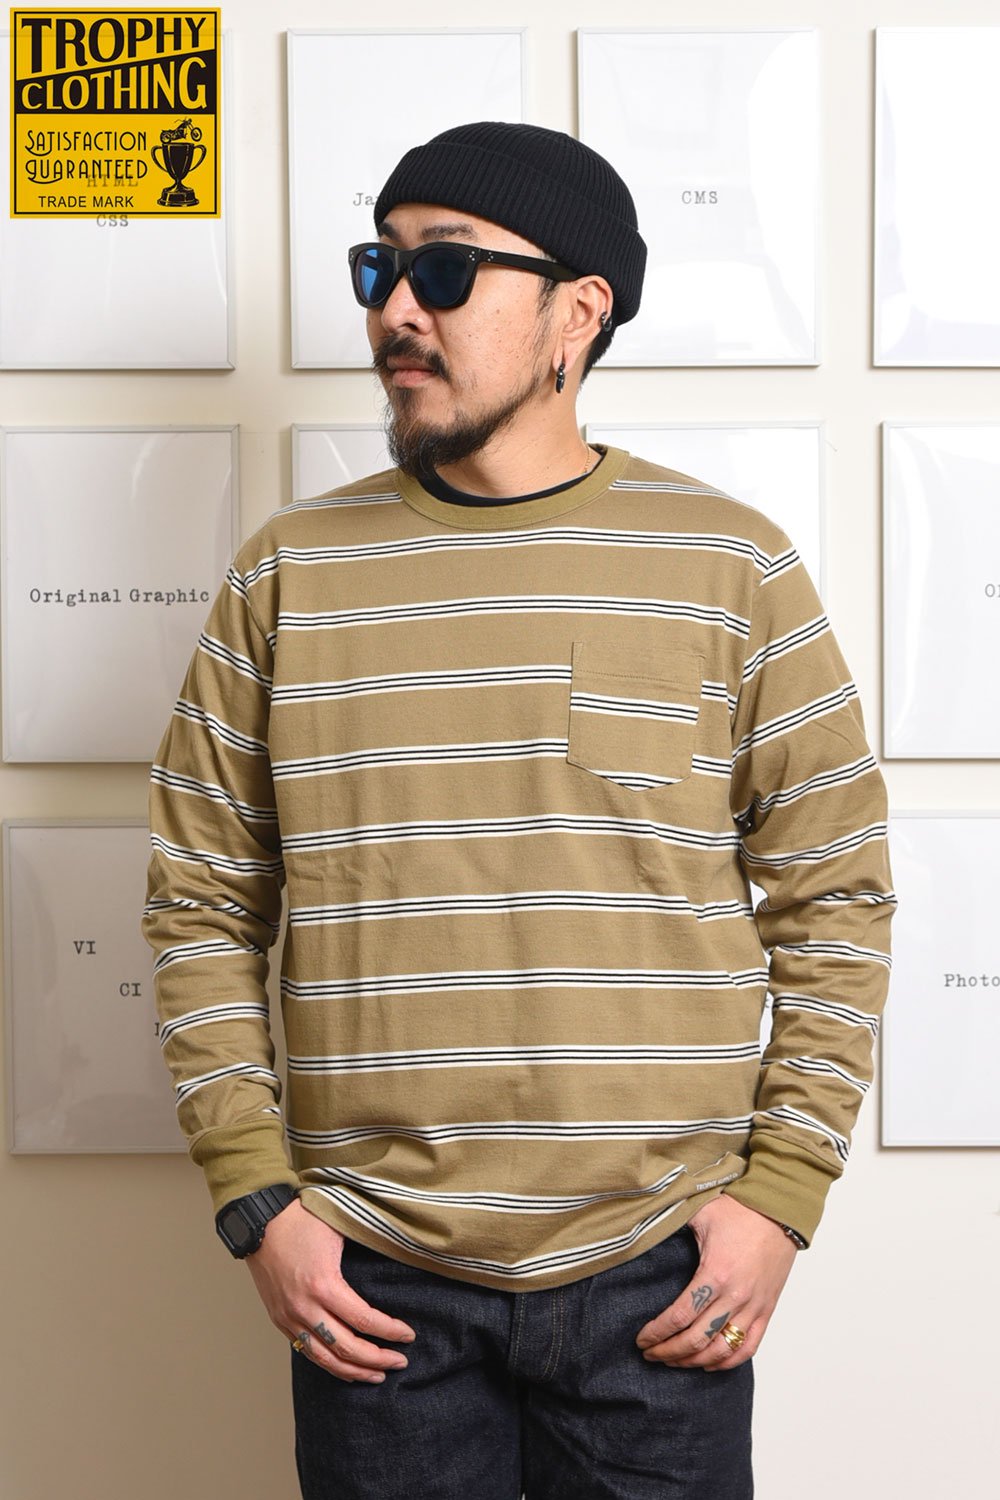 TROPHY CLOTHING(トロフィークロージング) ボーダーポケットロングスリーブTシャツ MULTI BORDER POCKET L/S  TEE TR21SS-202 通販正規取扱 | ハーレムストア公式通販サイト